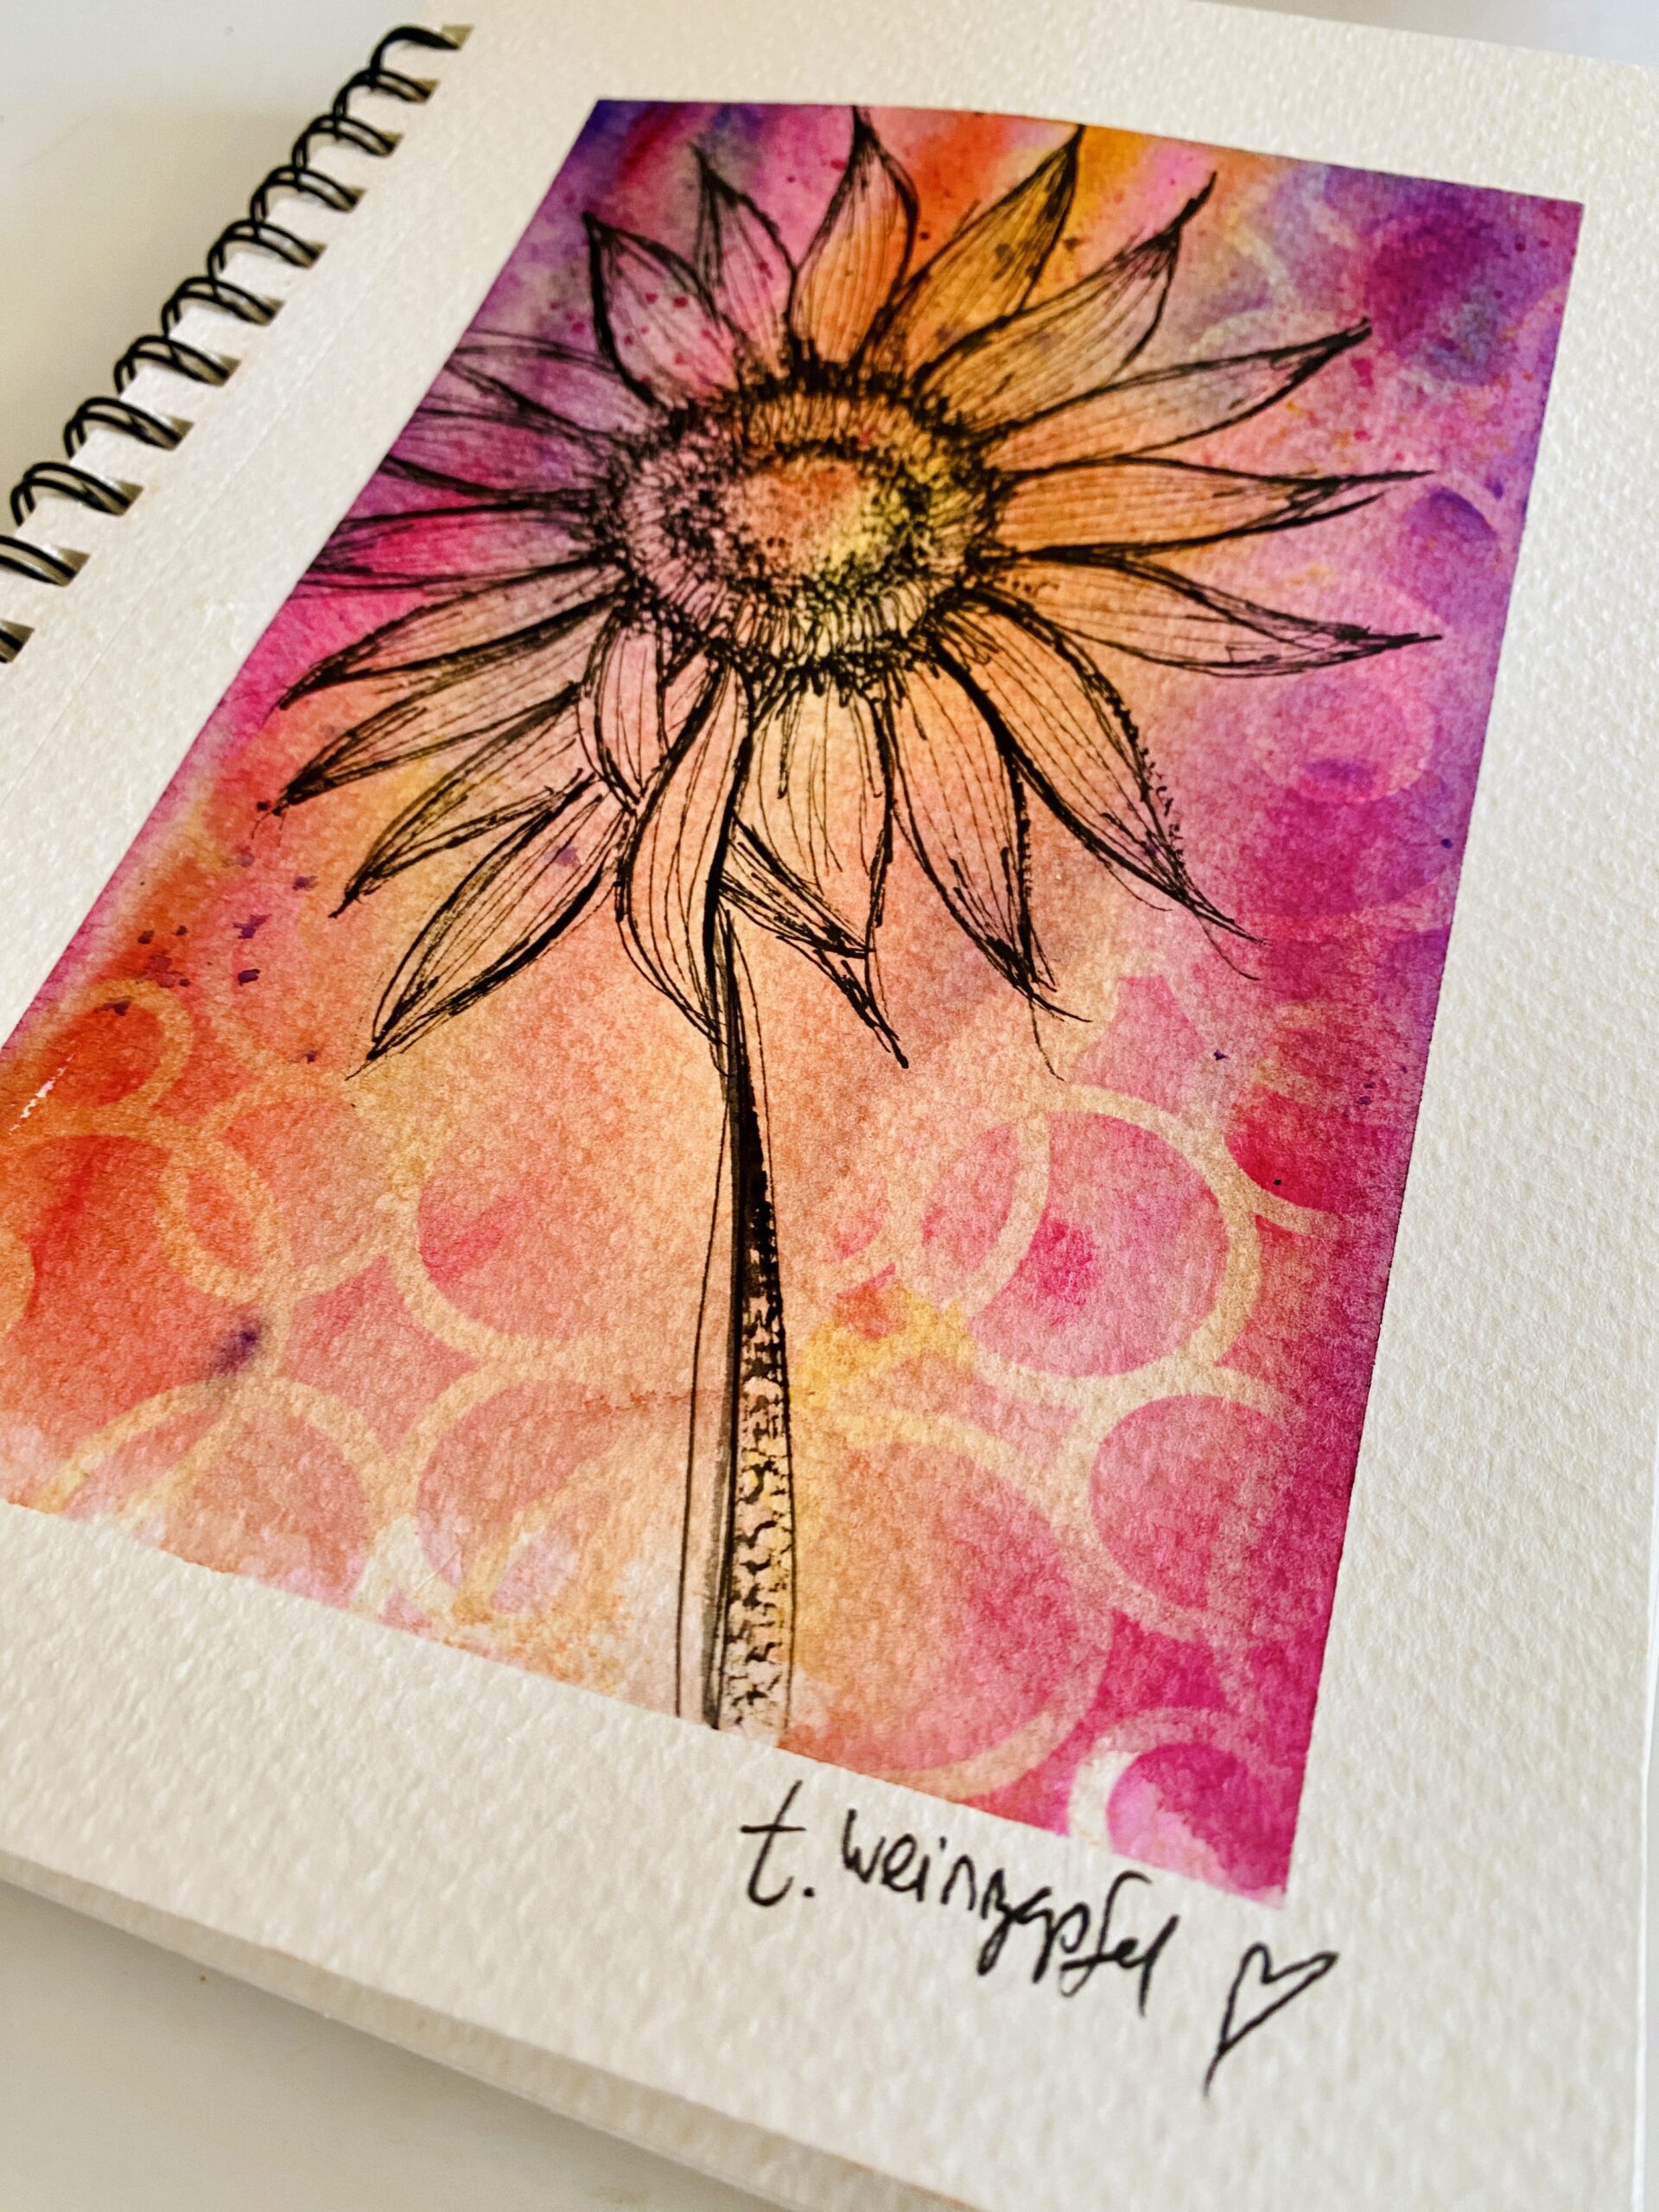 finished watercolor flower art